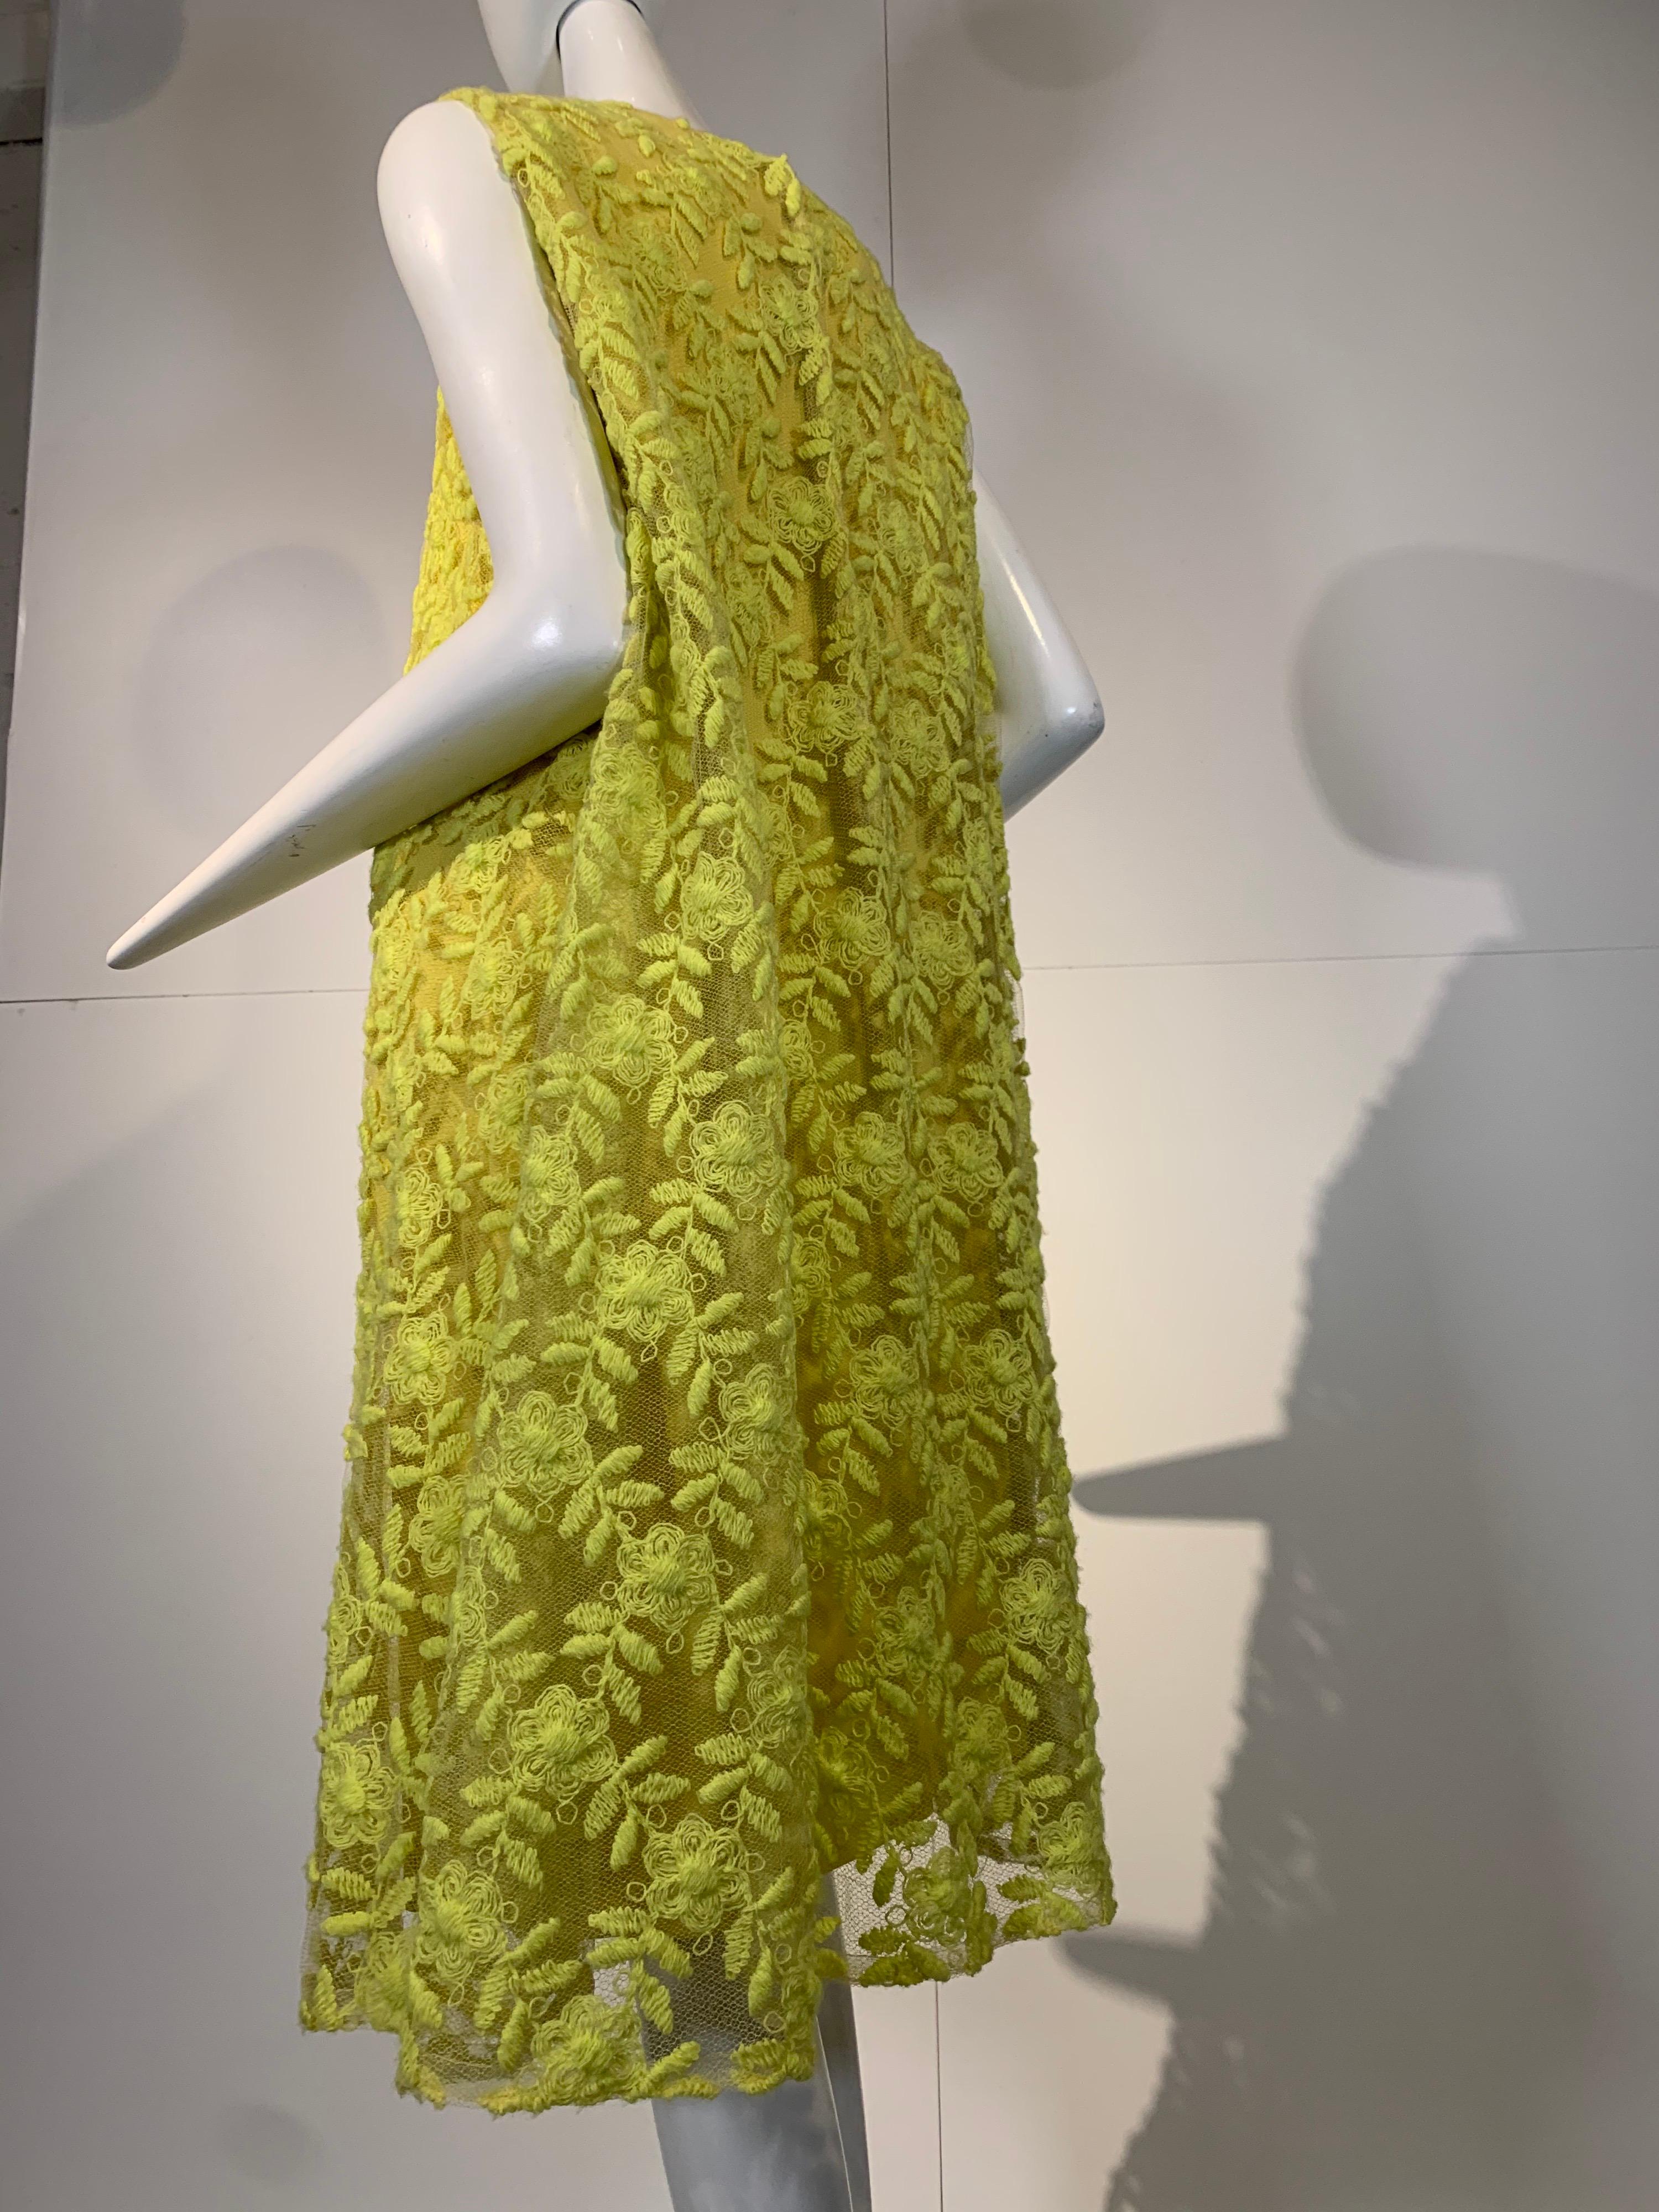 1960s Mr. Blackwell fluorescent yellow floral embroidered net cocktail dress. Under-layer is a sheath styled crepe dress and the over-layer of embroidered tulle is cut in a flowing trapeze style!  Really stunning and fun! Size 12 Modern.